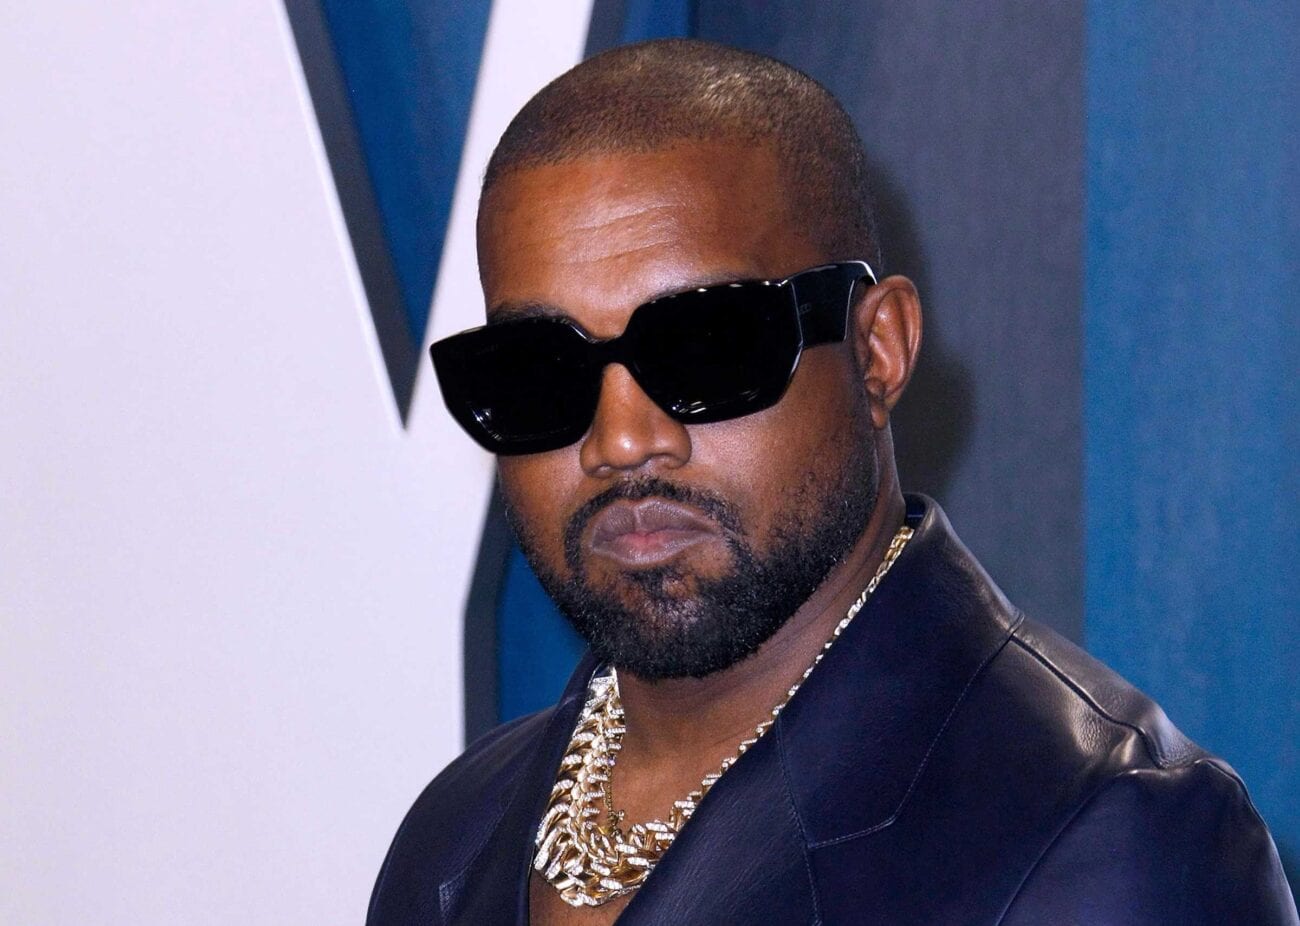 As the announcement dropped, the internet exploded. Here's everything we know about Kanye West’s plan to run for President in 2020.